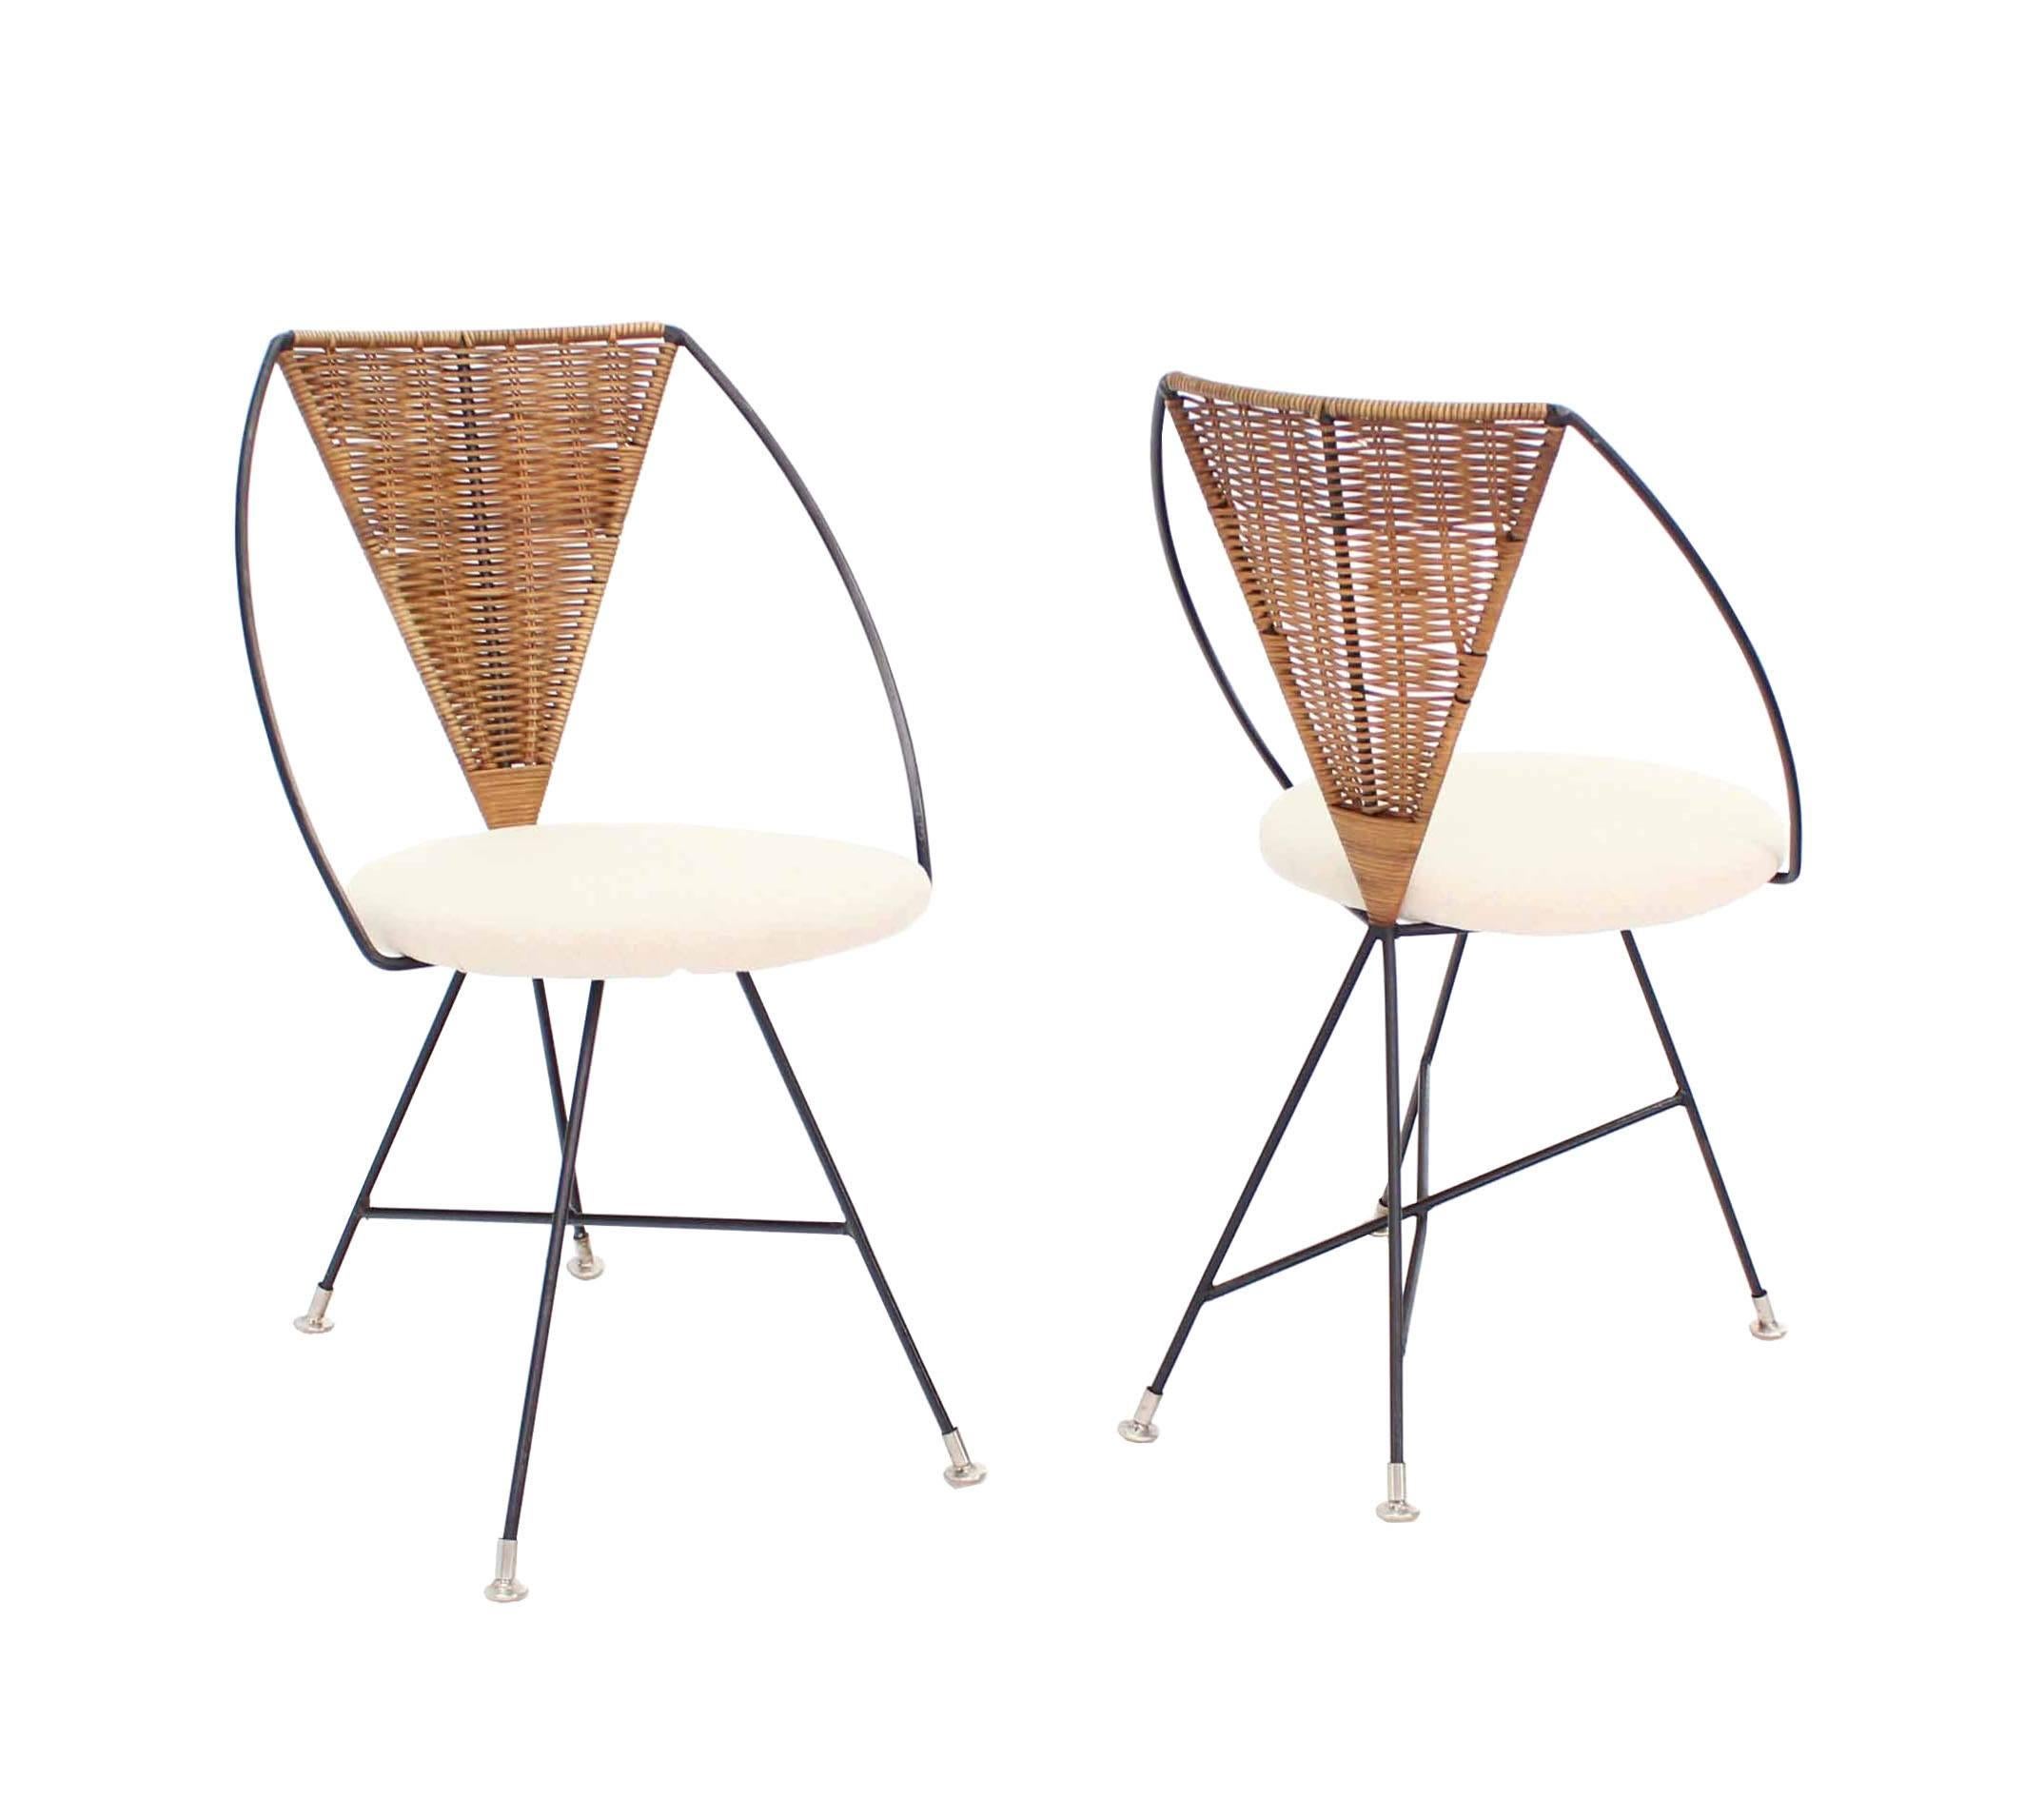 New upholstery whicker backs Mid-Century Modern side dining chairs. Outdoor optional. Nice bent wire design.